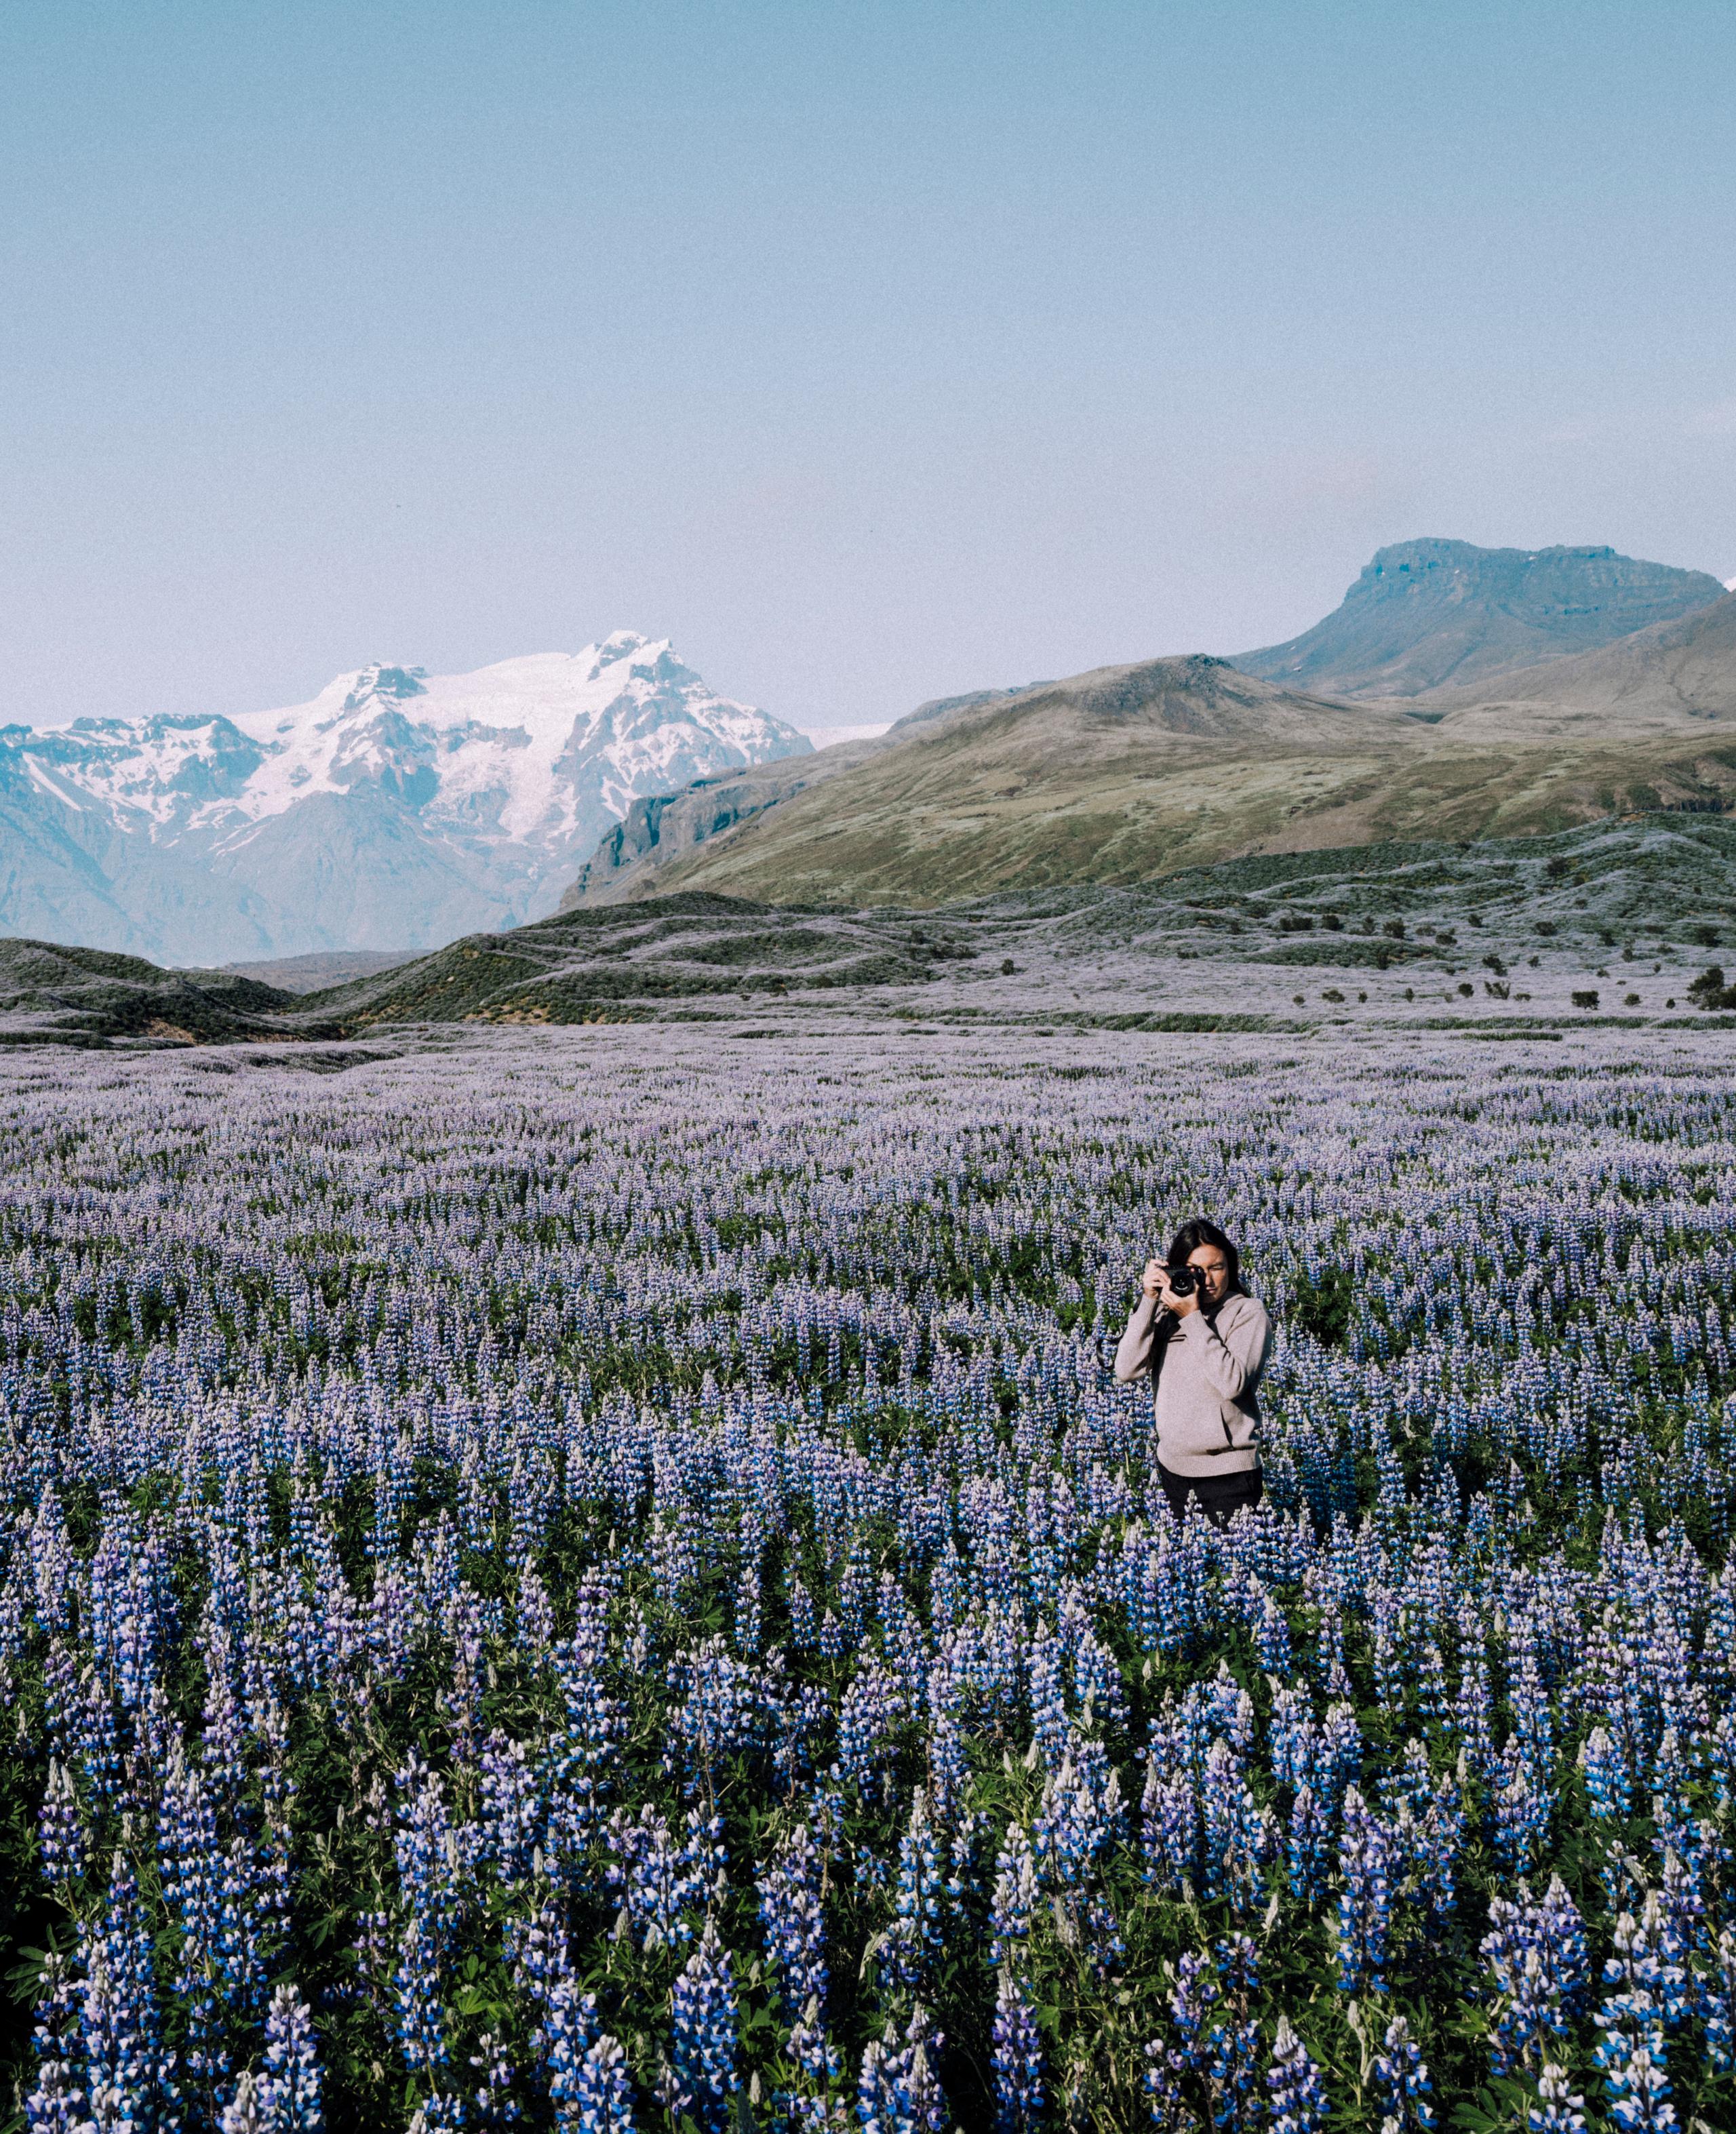 Woman holding up camera taking a picture standing in a field of lavender in Iceland with snowy mountains in background